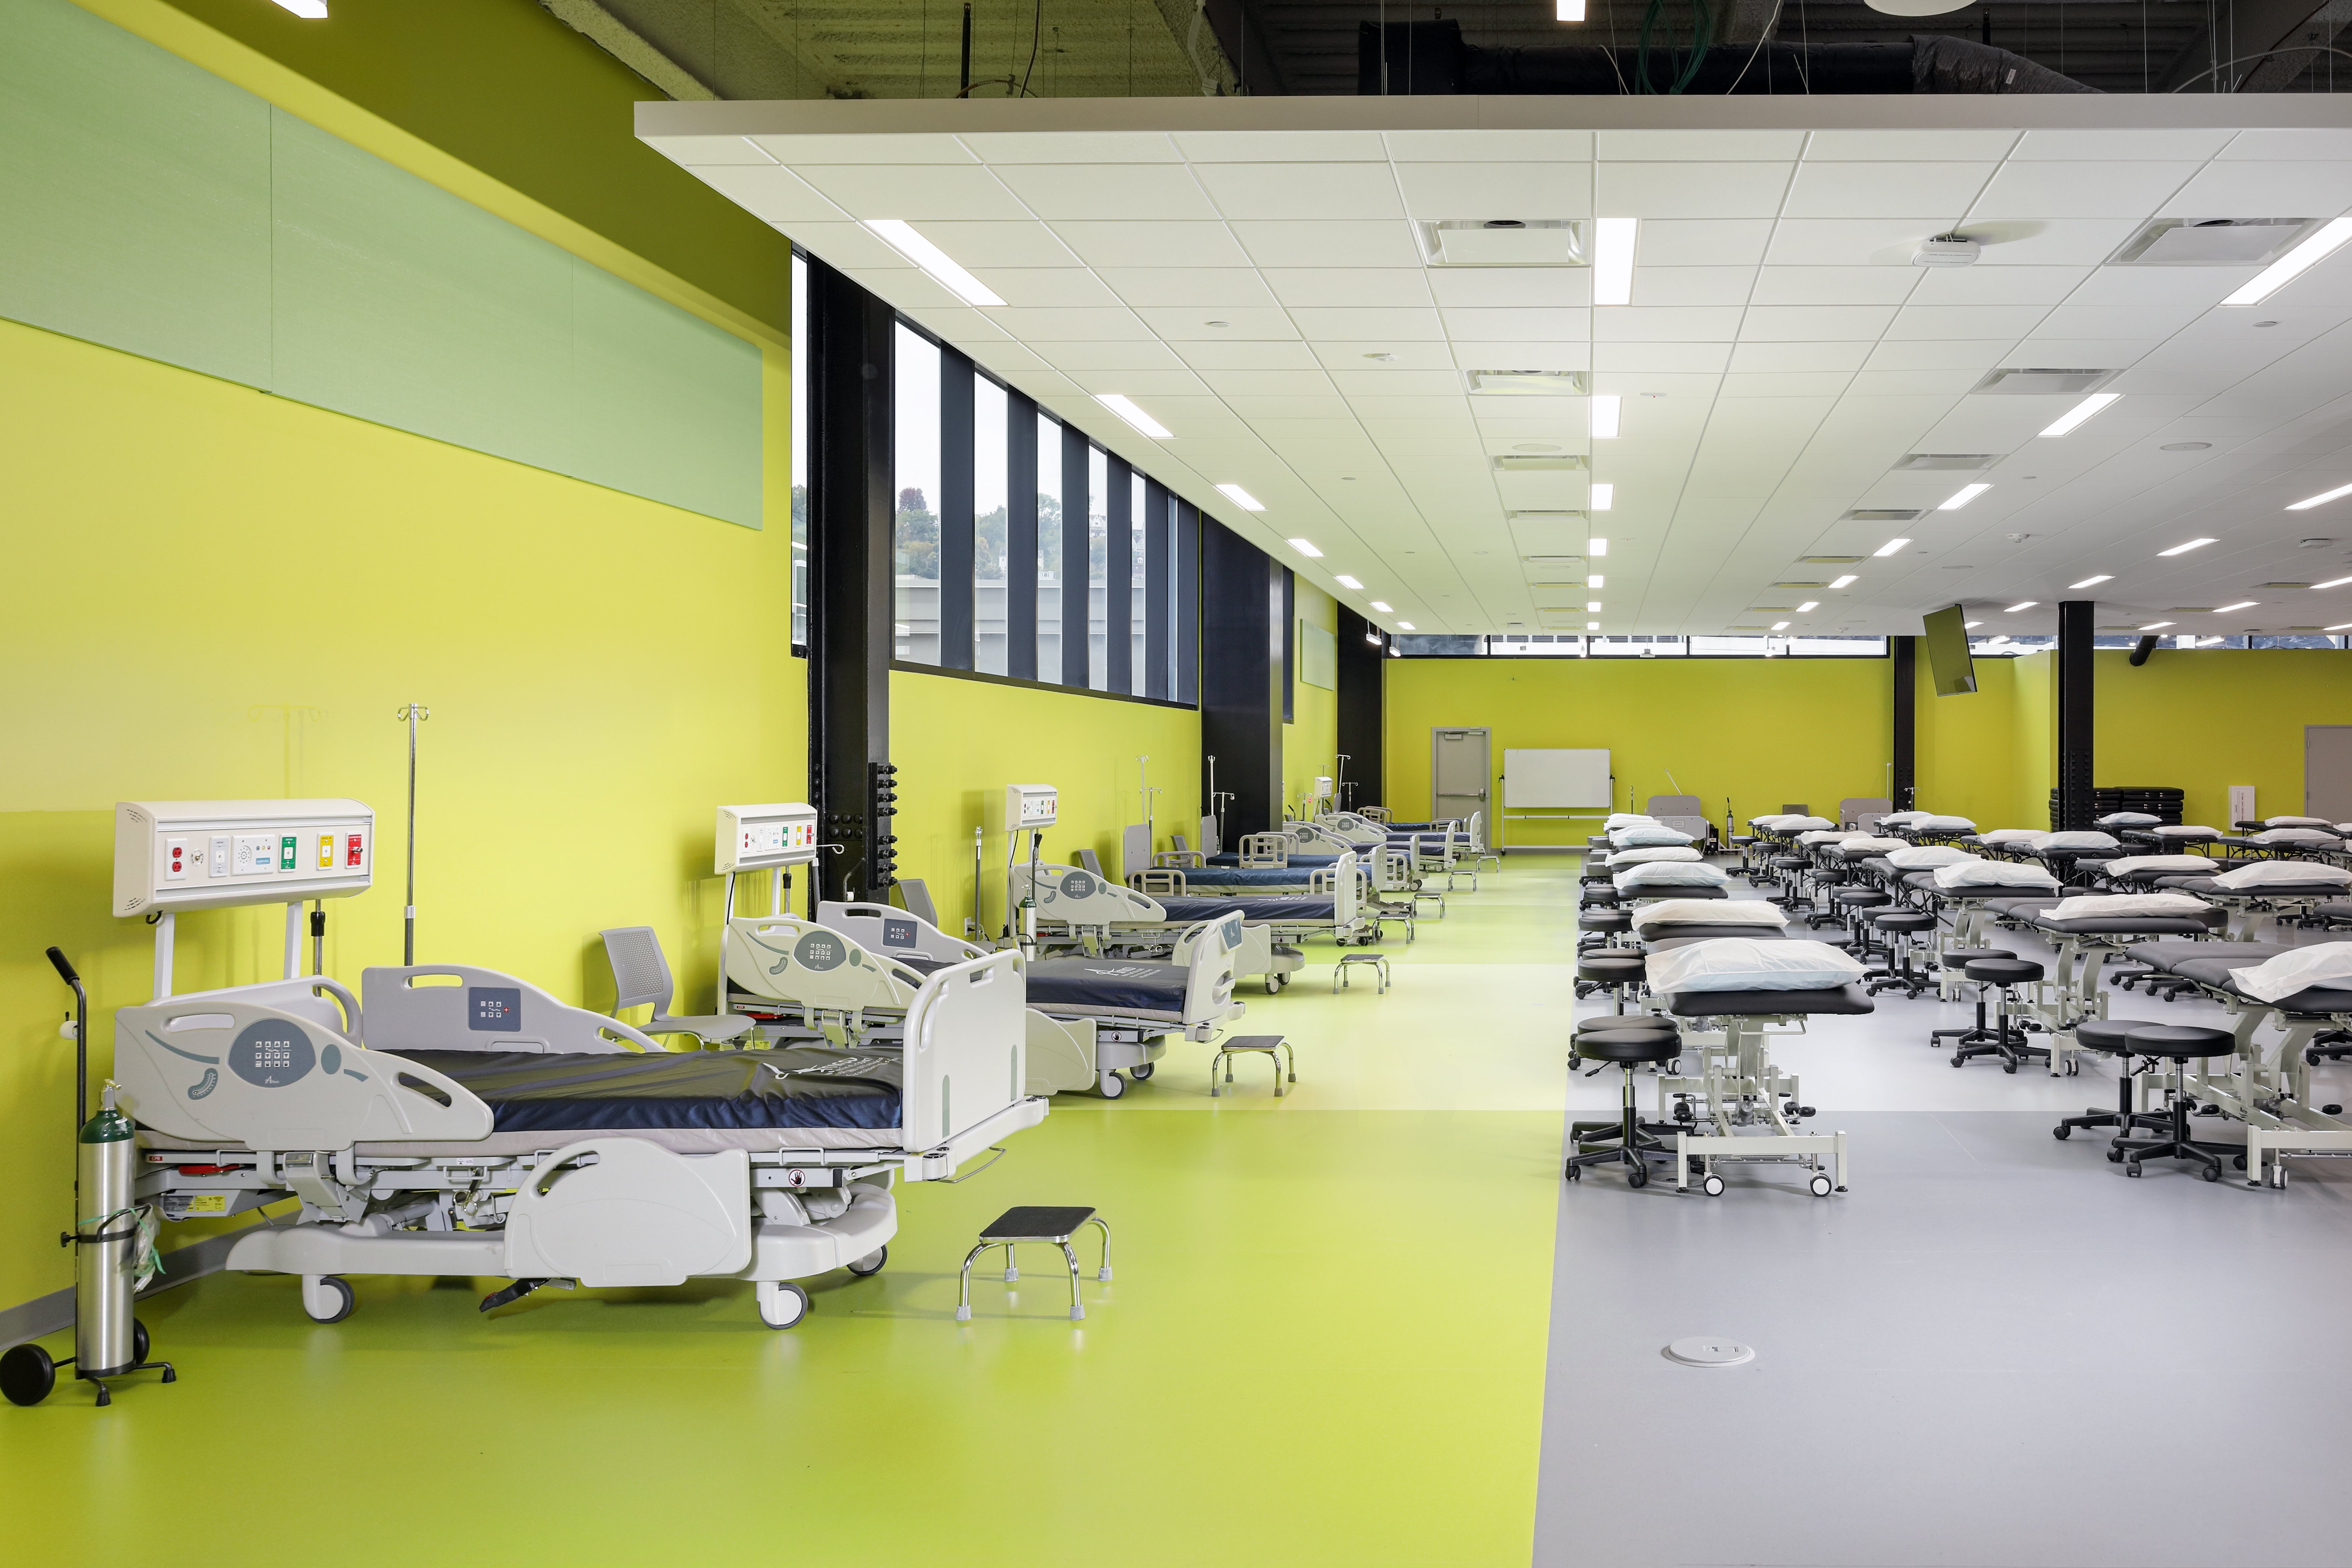 Lab space with examination and hospital beds